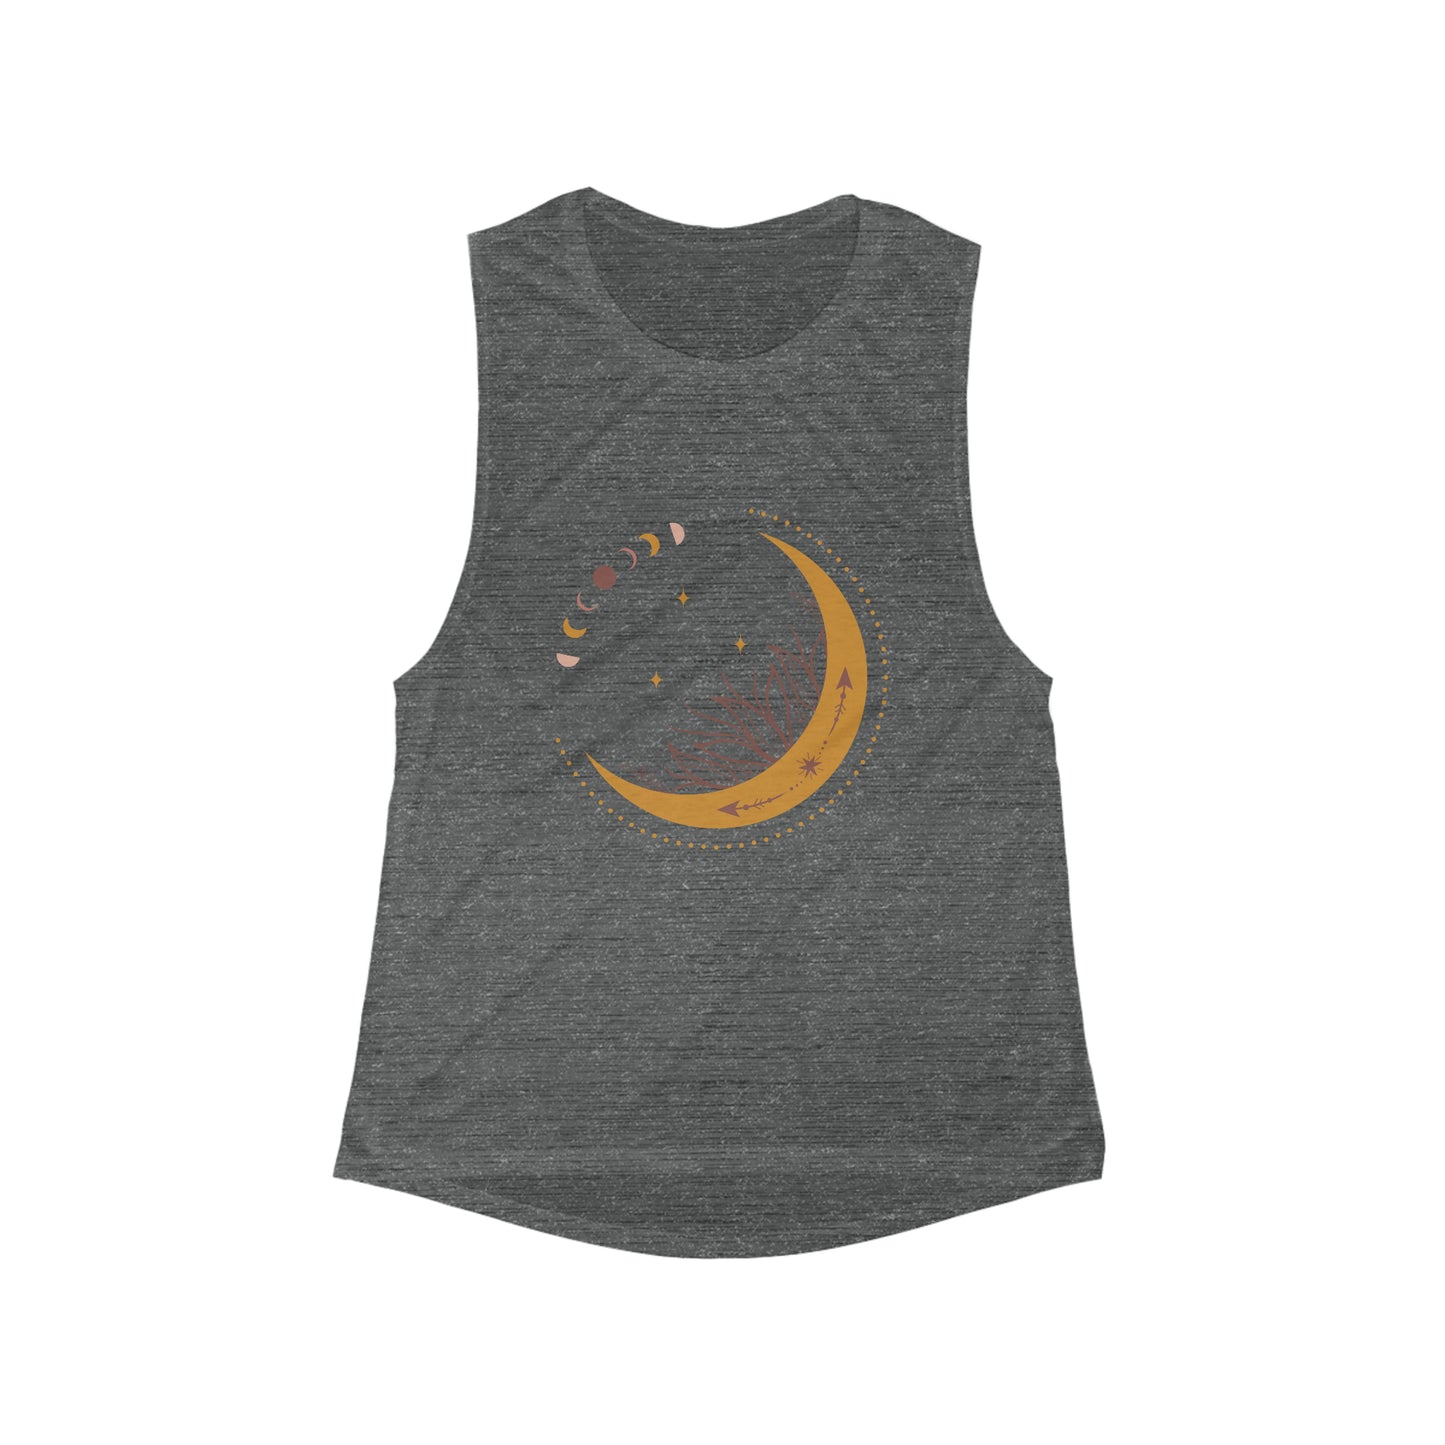 Bohemian Moon Scoop Tank (Available In Other Colors)